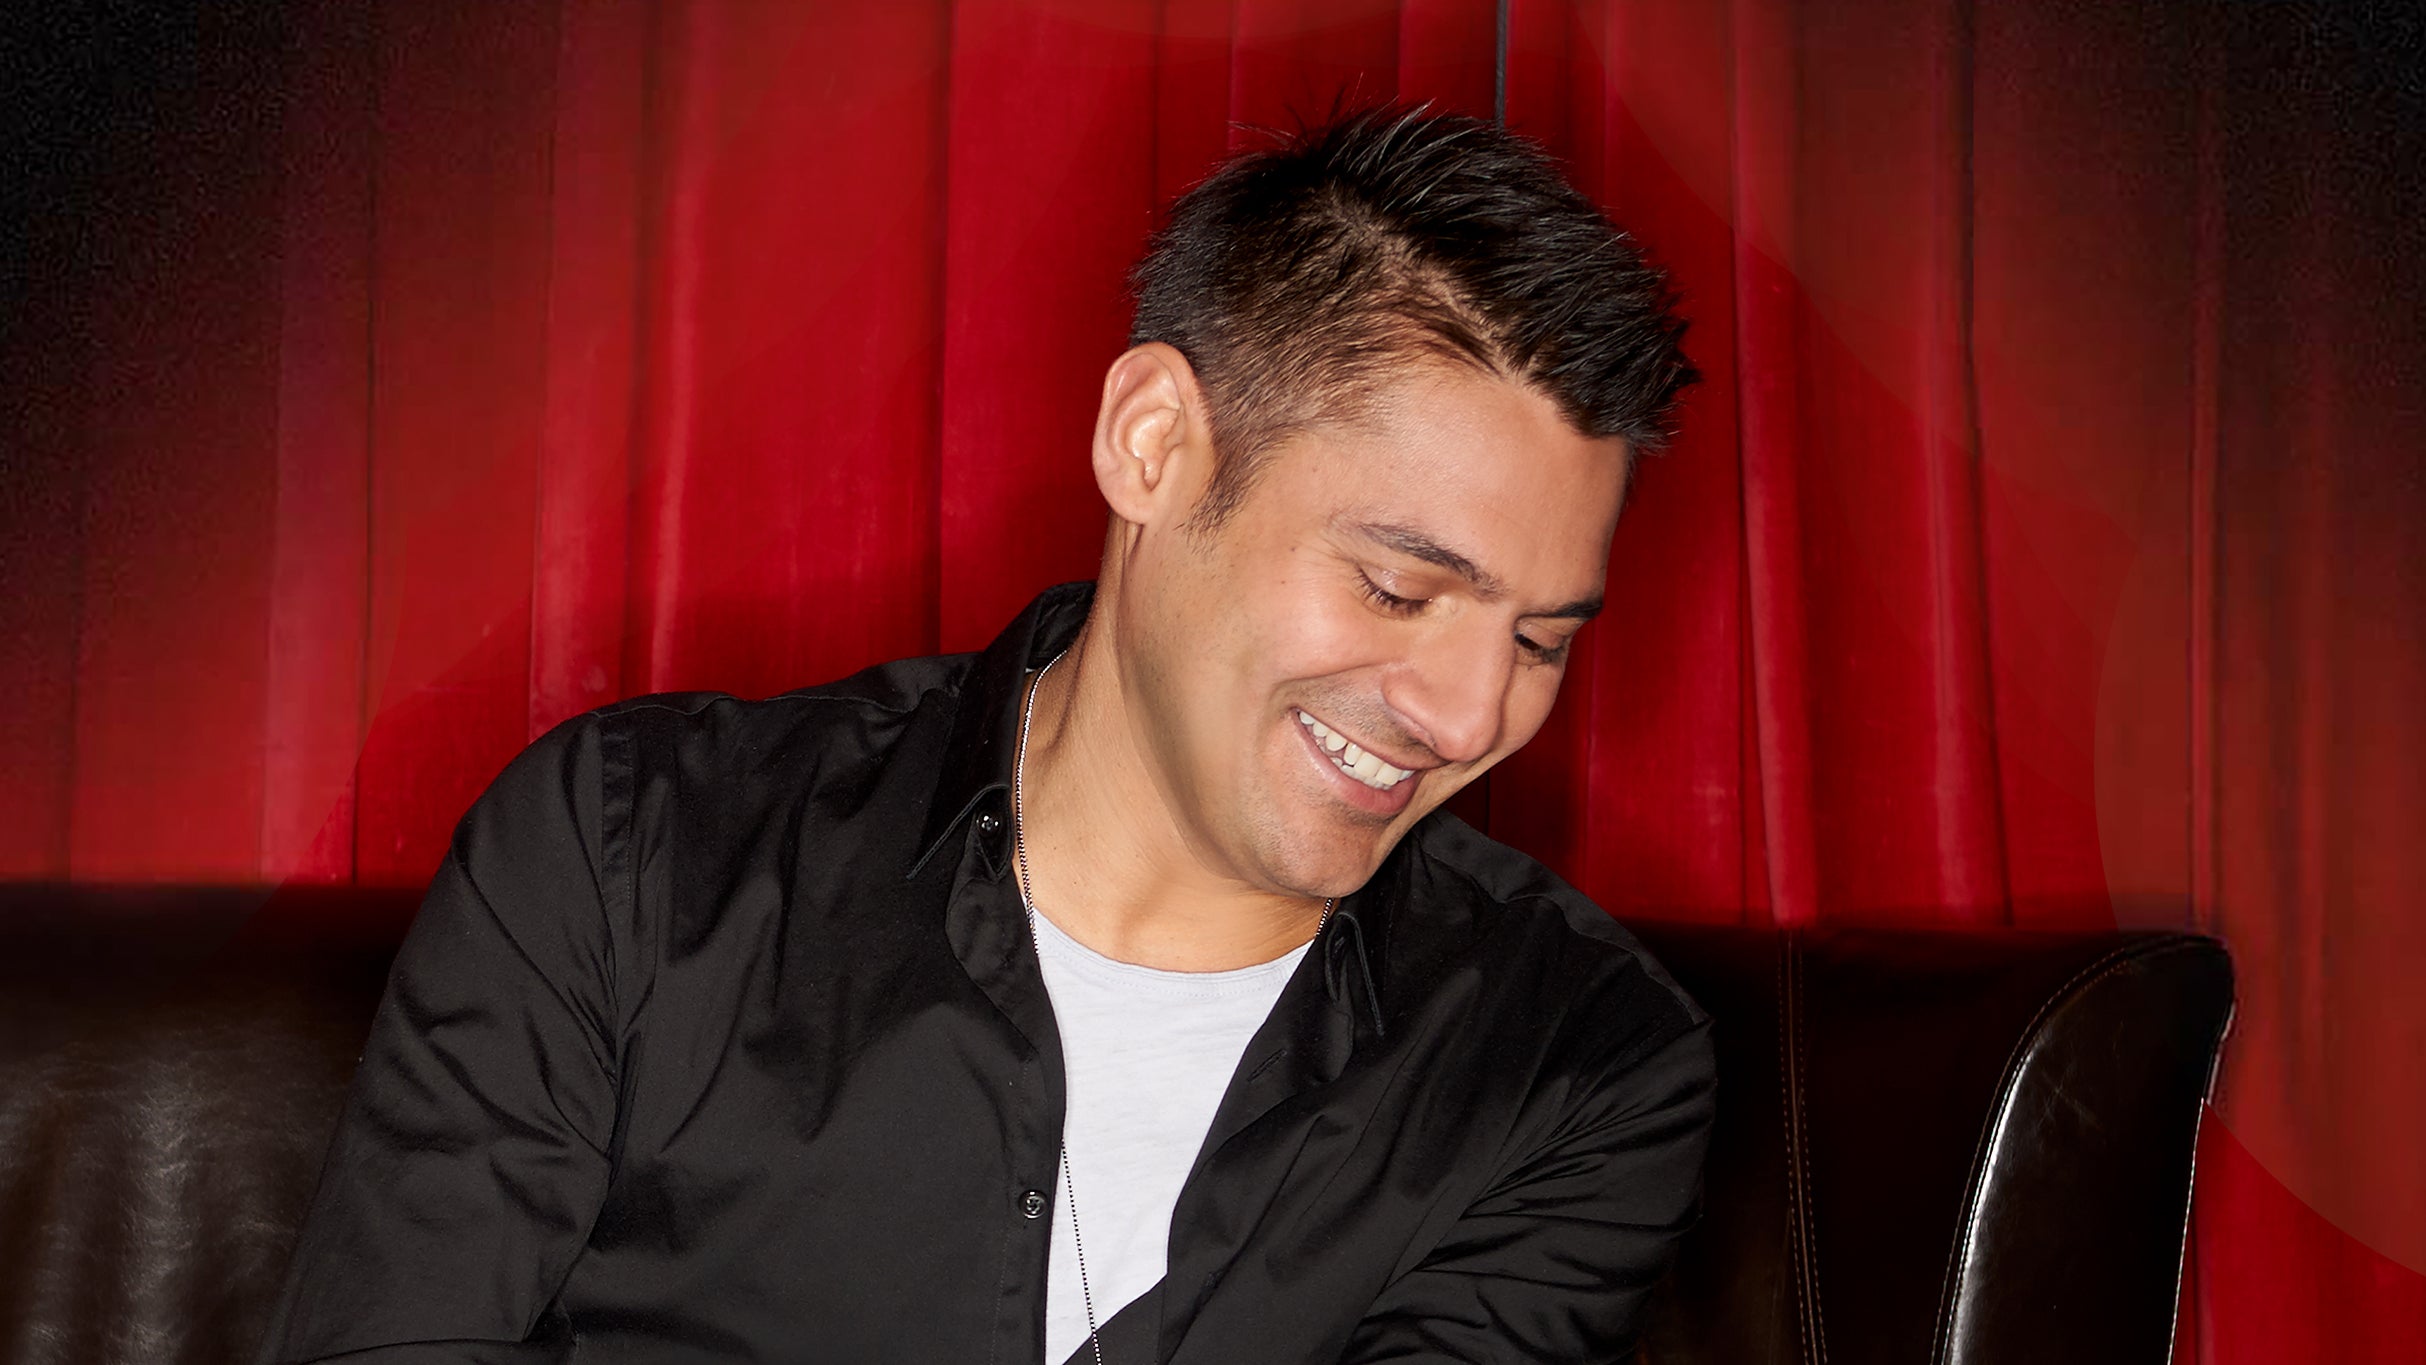 Image used with permission from Ticketmaster | Danny Bhoy - Now is not a good time tickets